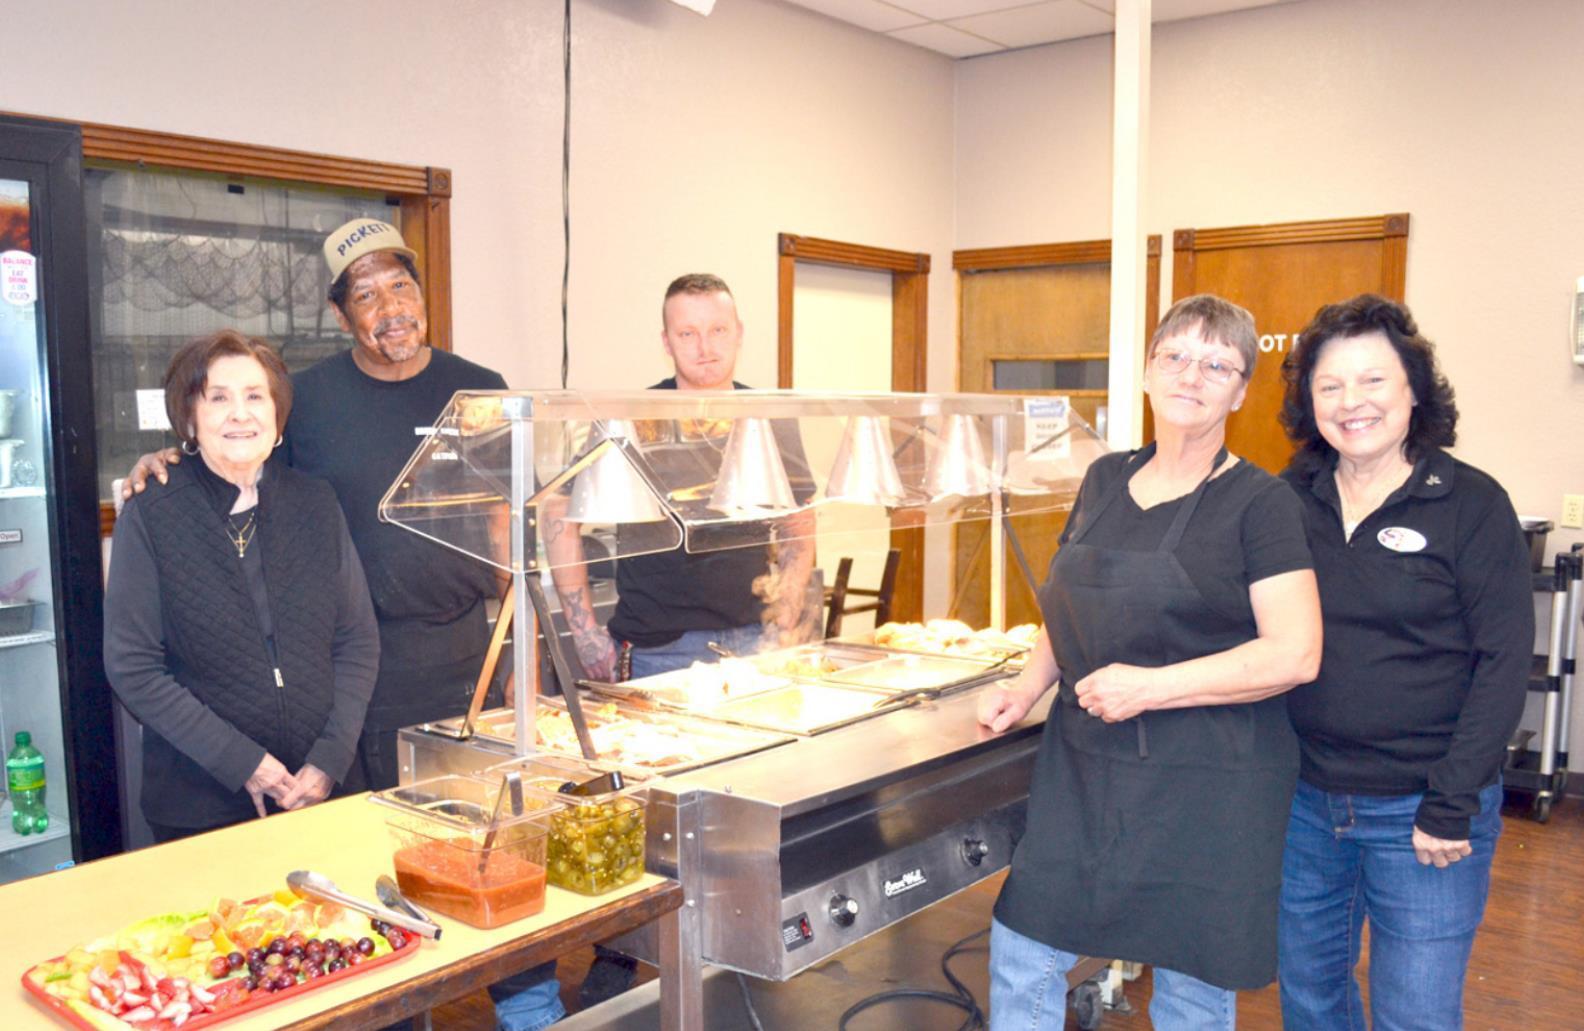 Representatives of Brush Creek BBQ &amp;amp; Catfish gathered around the new Breakfast Bar Friday morning. Pictured, from left, are: owner Reta Gilliam, chef Andra Pickett, Gary Skinner, Michelle Redding and JoAnn Ray. • photo by Mark Codner